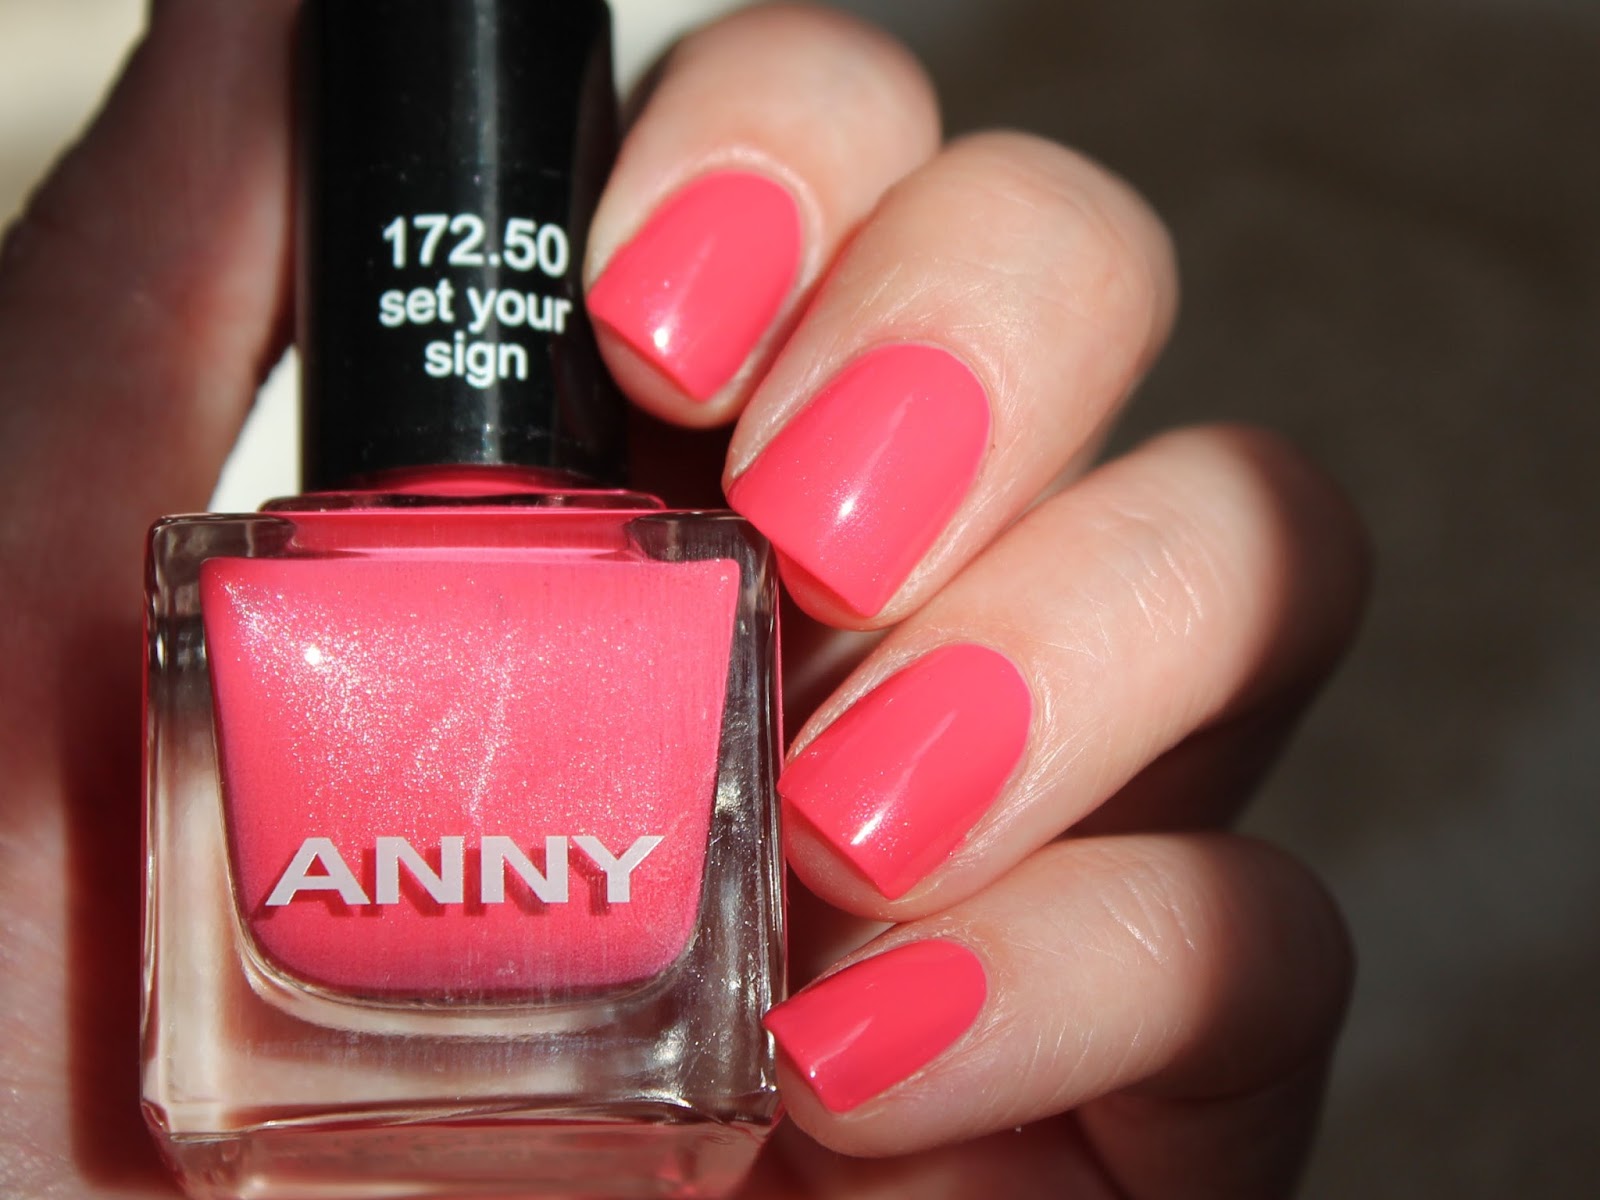 ANNY nail polish - "Anny For Winners" Collection.